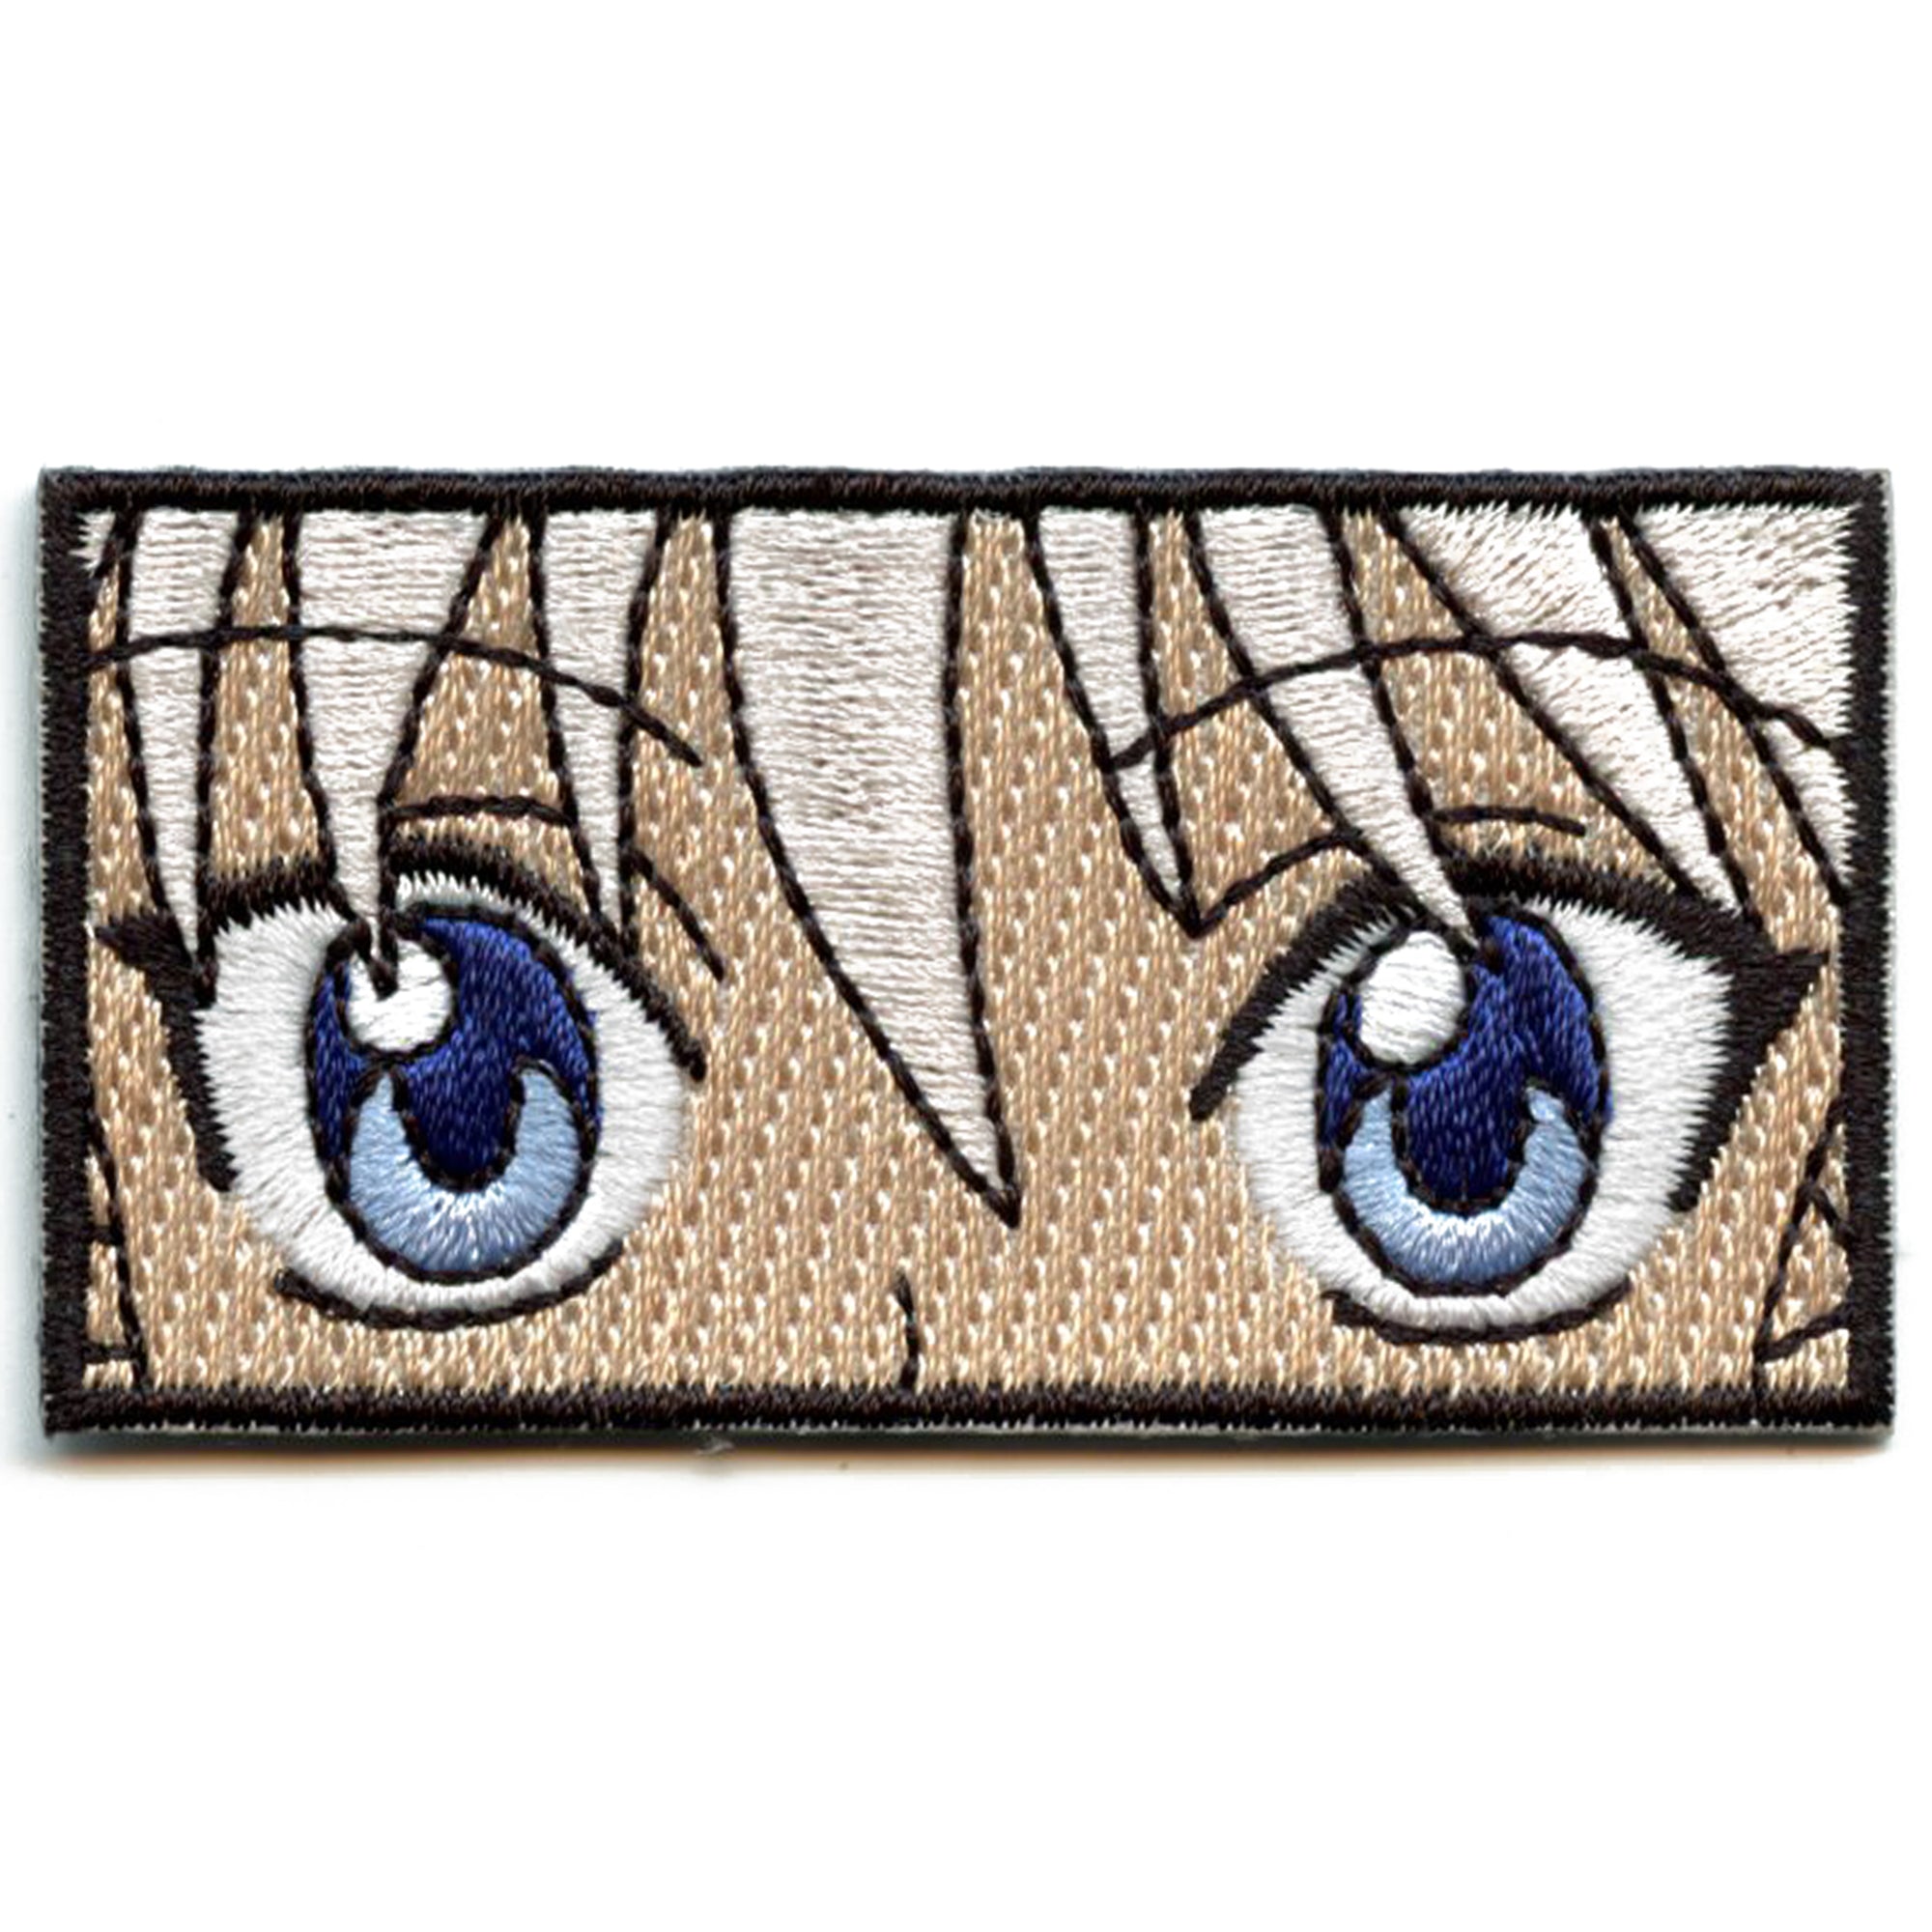 Buy Anime Patch Online In India  Etsy India